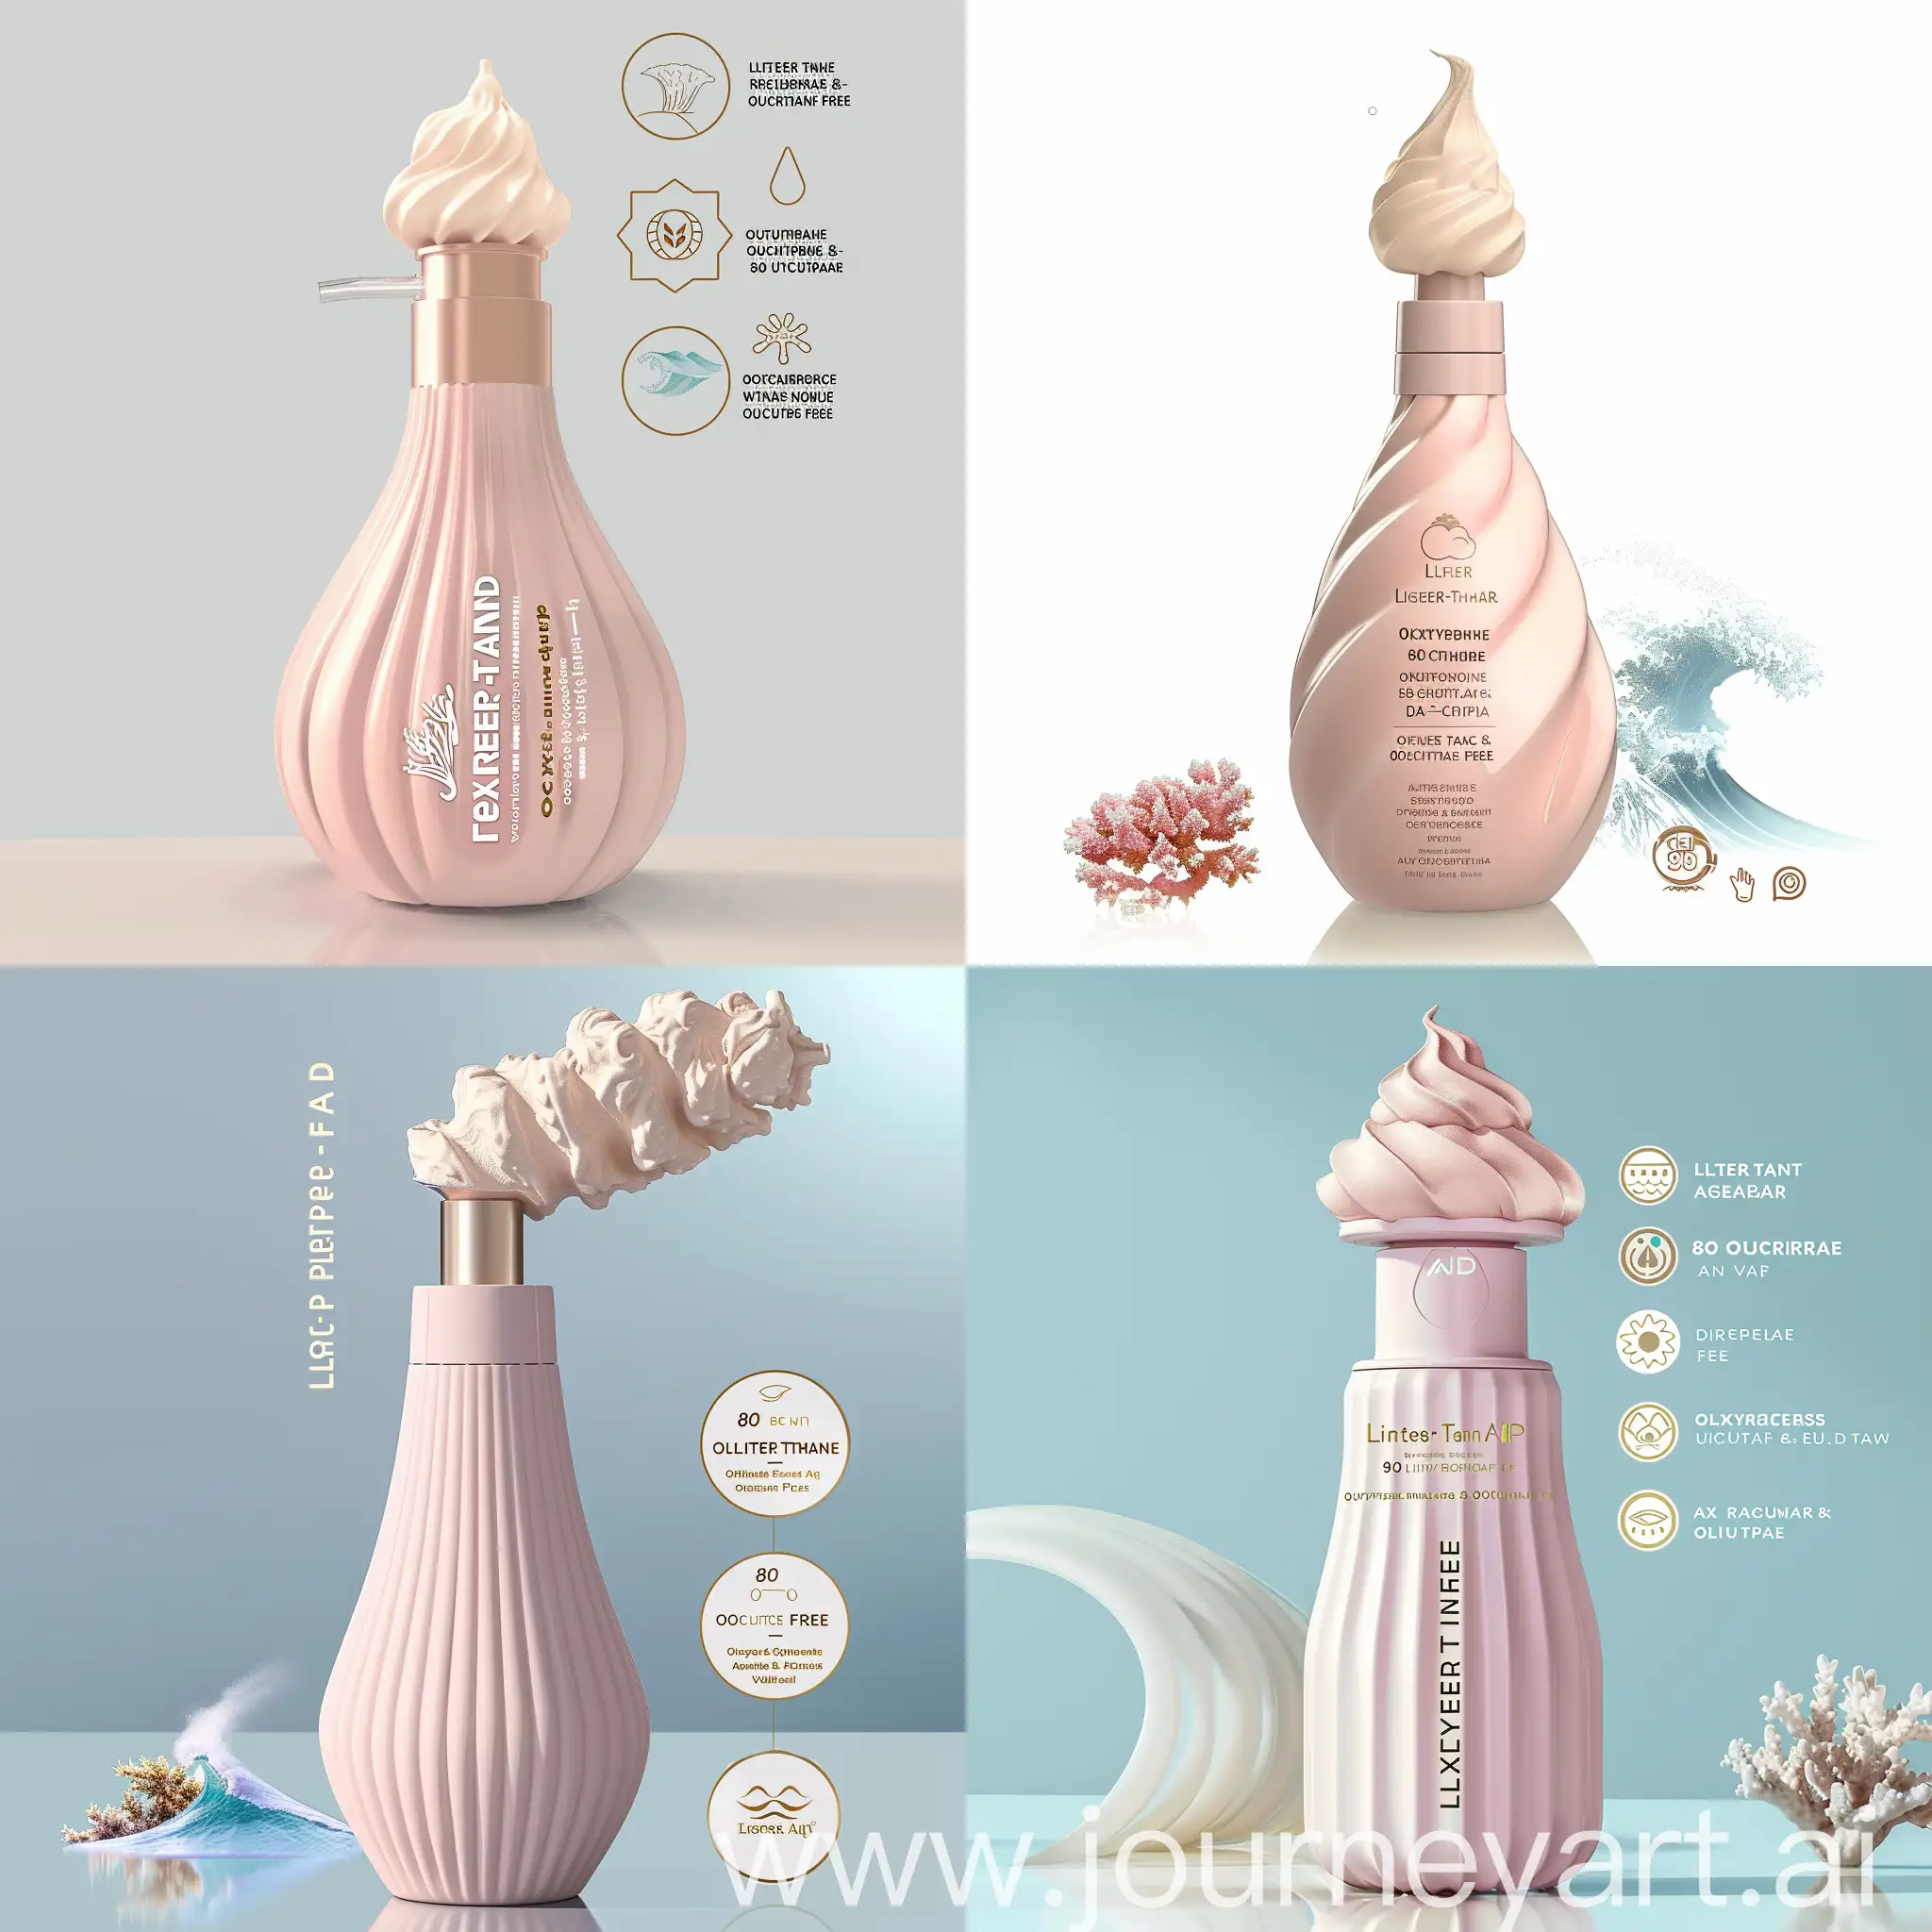 imagine a sleek, baby pink bottle. The bottle should have a dispenser and look luxorious. The cap should look like whipped cream. The labels on the bottle should be "Lighter-Than-Air" , "Water-Resistant (80 minutes)", "Oxybenzone & Octinoxate free." They should be wrtitten in gold color. Additionally, include symbols representing the product being eco-friendly, cruelty-free, and vegan attributes. Also add a small image of a wave and a coral reef
